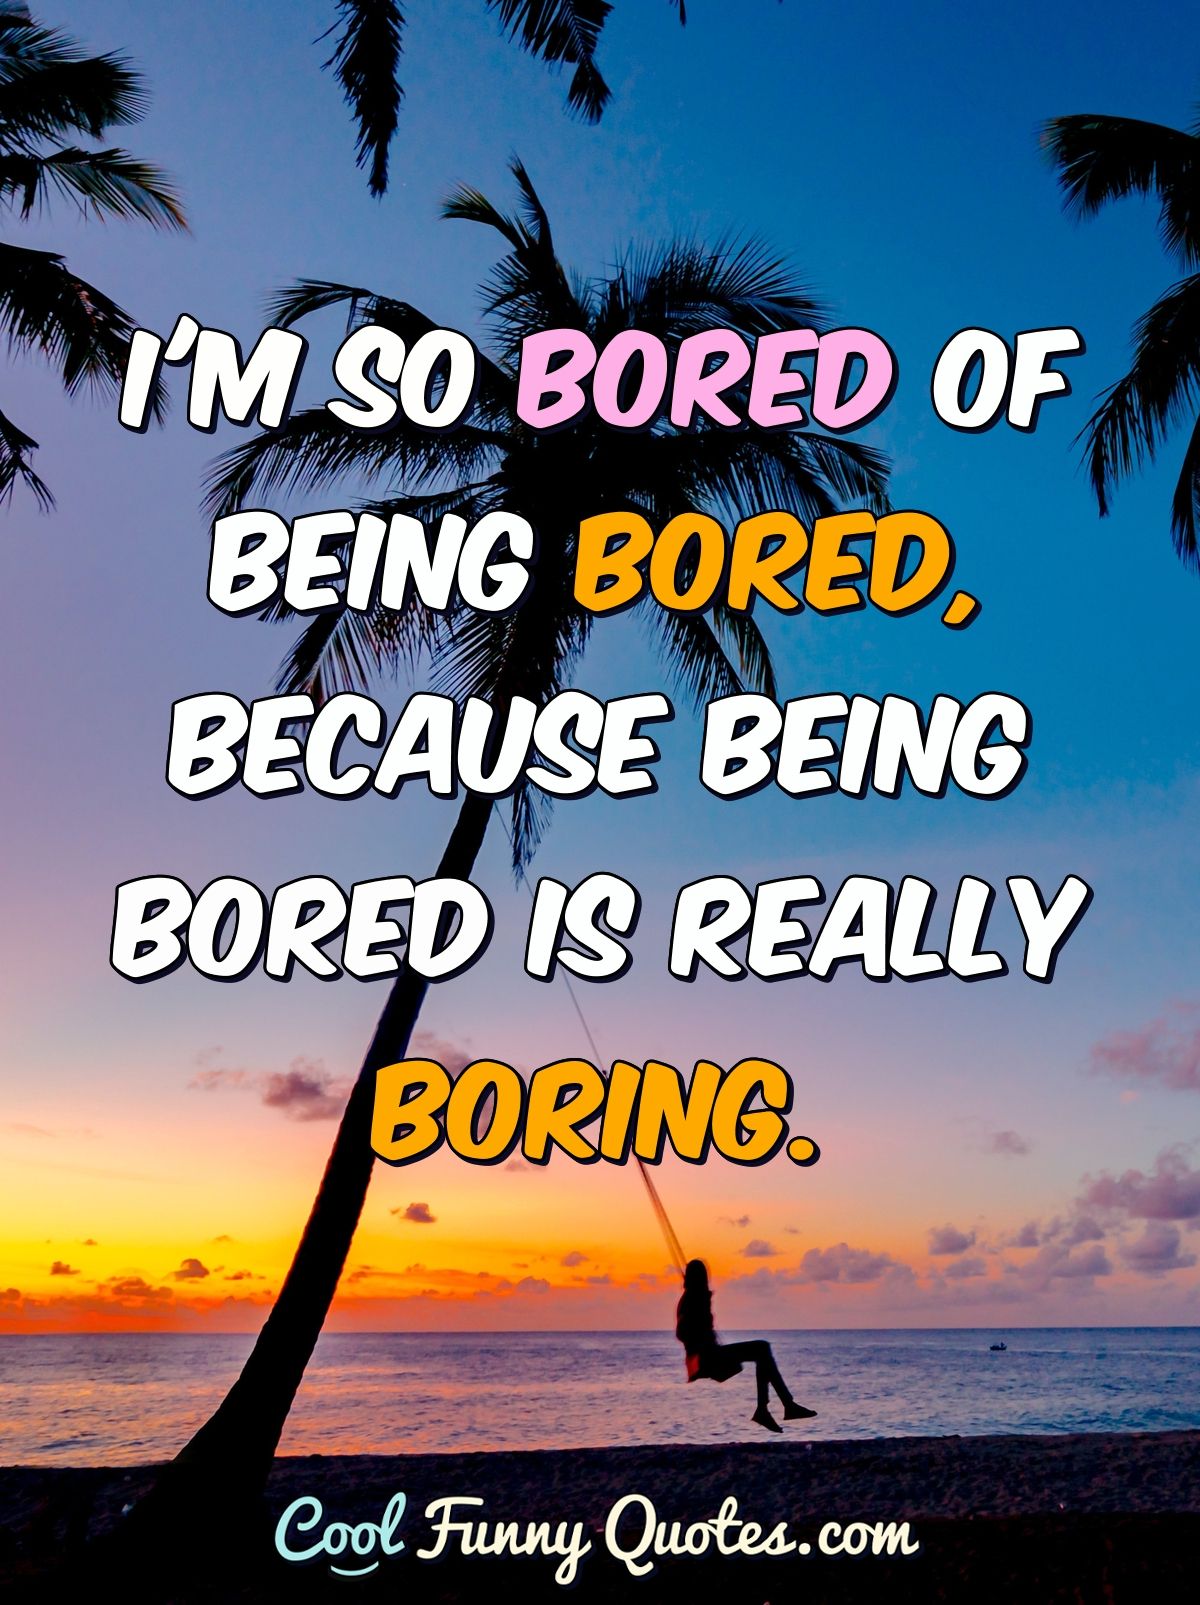 I'm so bored of being bored, because being bored is really boring.